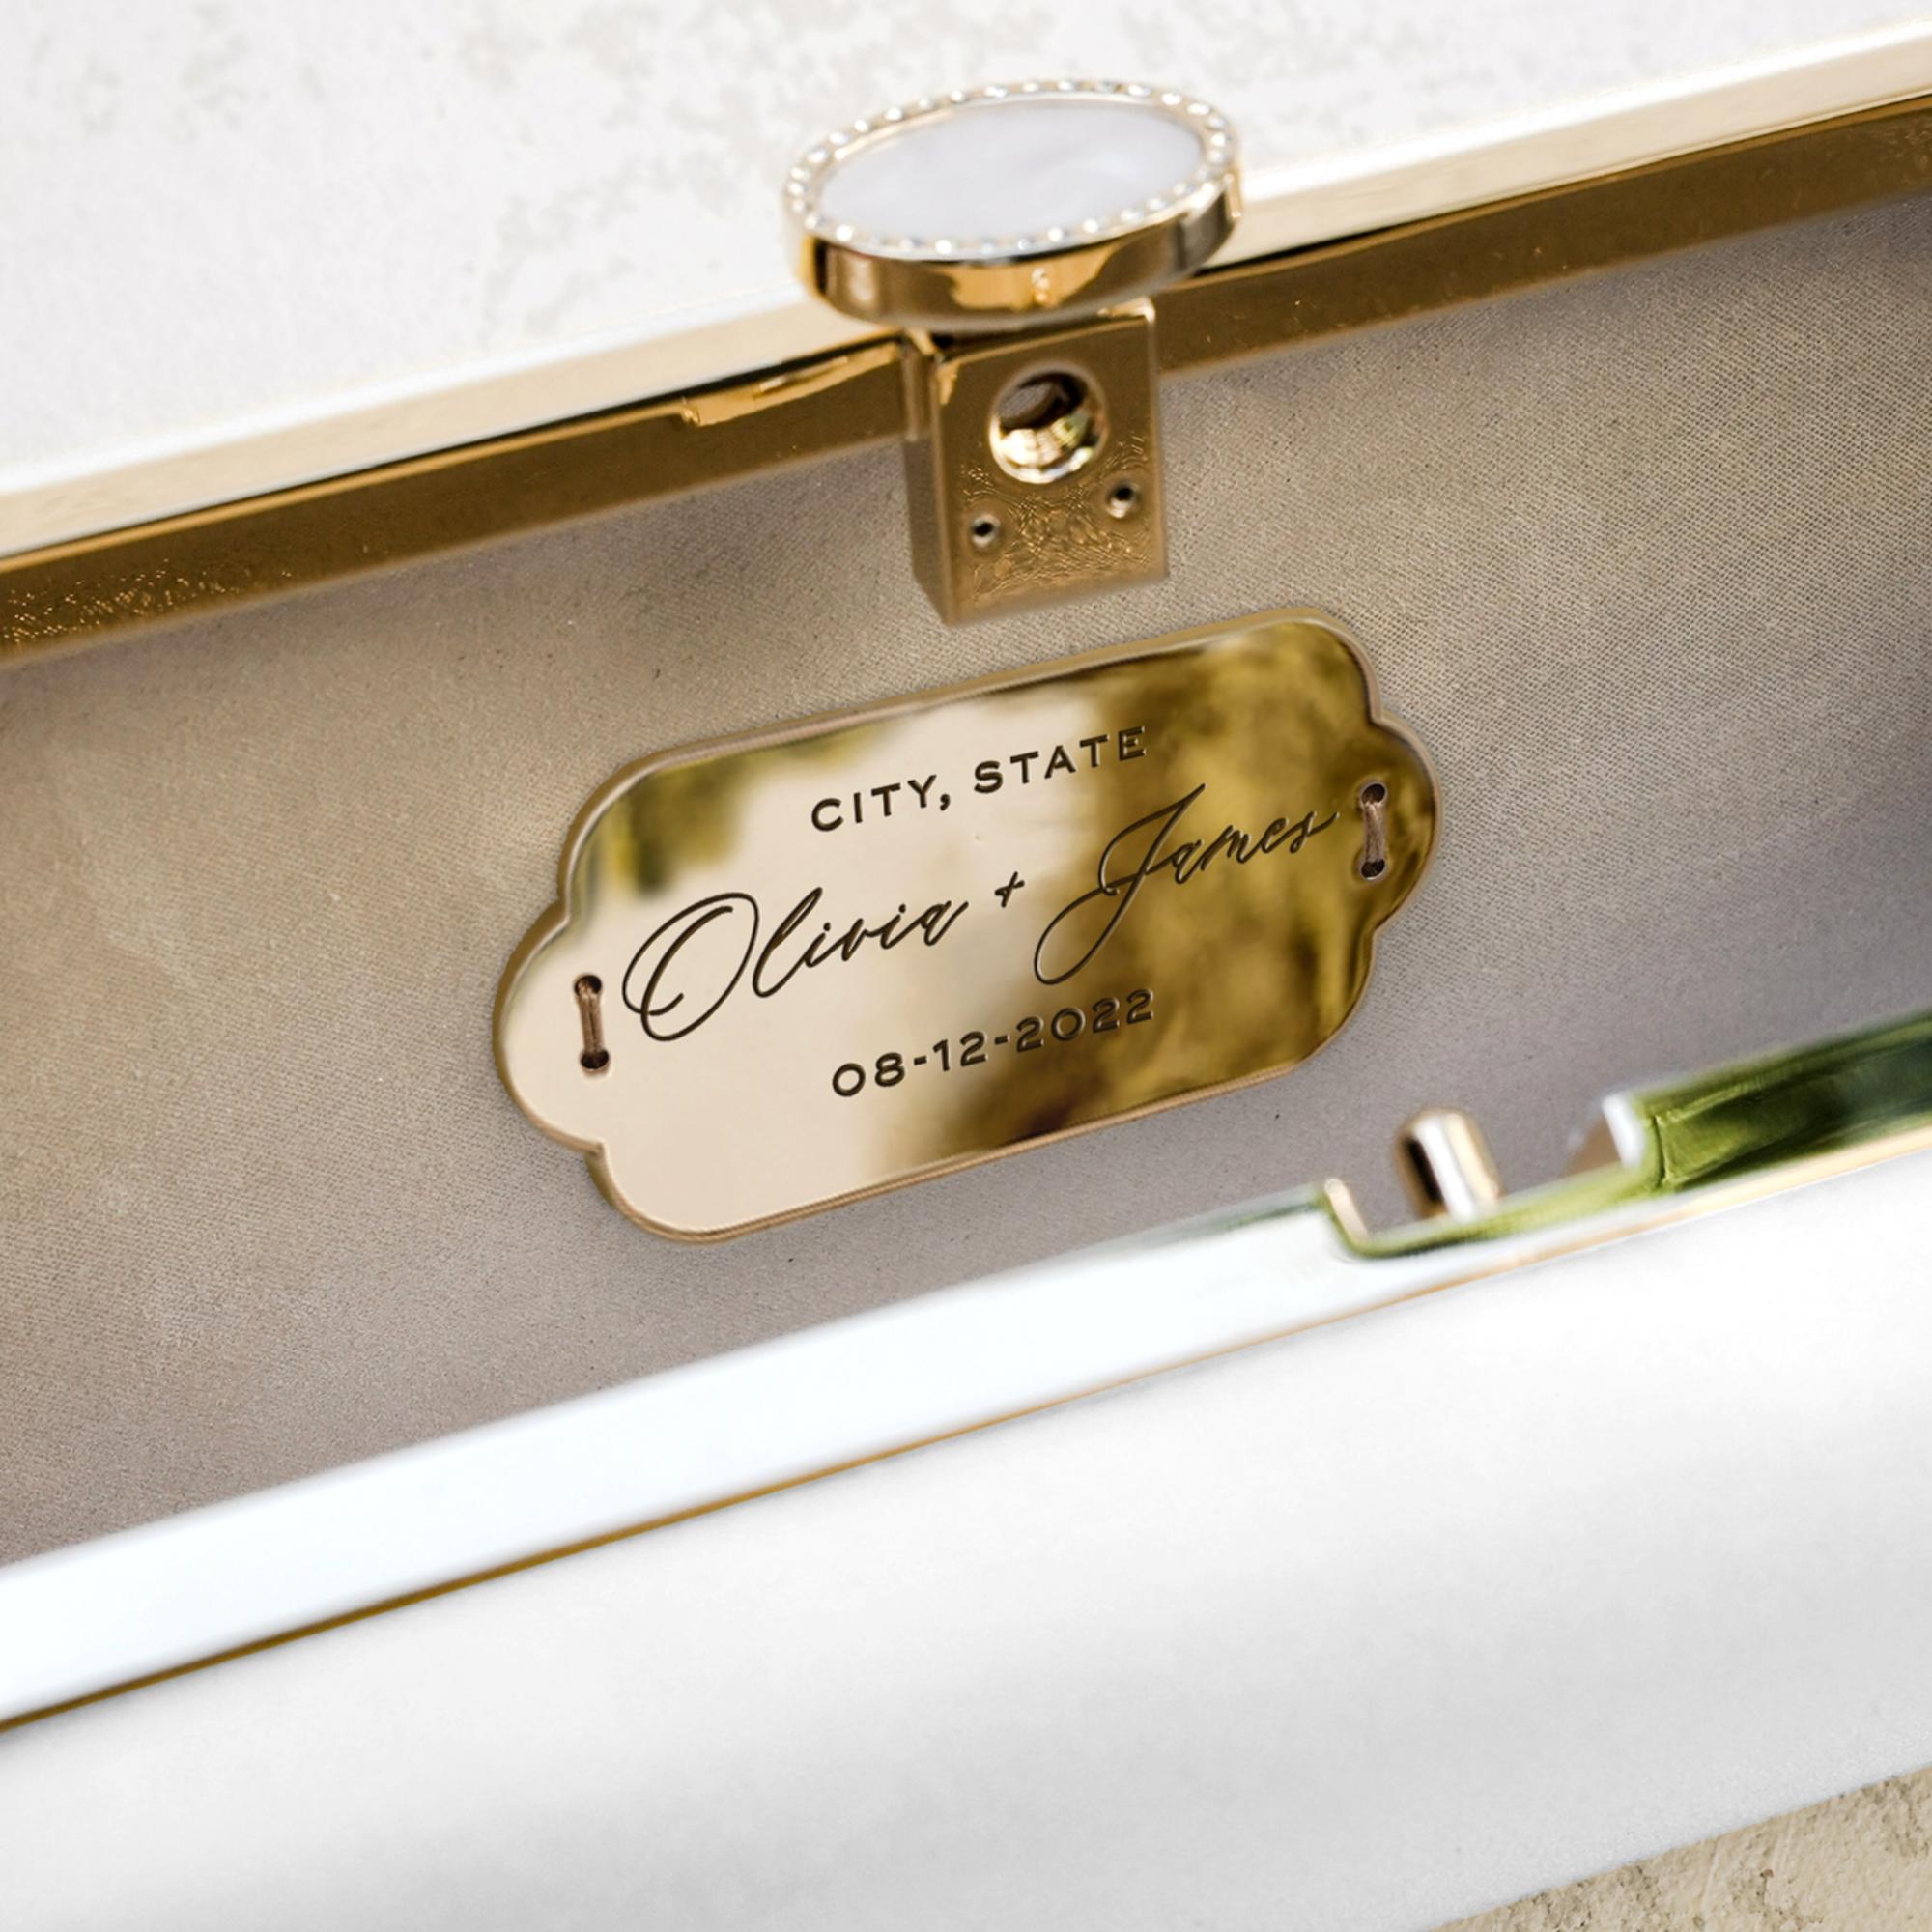 Two names and a date engraved on the Personalized Plaque Sentiment Engraving attached to a cream-colored Bella Rosa bag, suggesting a personalized accessory for a special occasion from The Bella Rosa Collection.